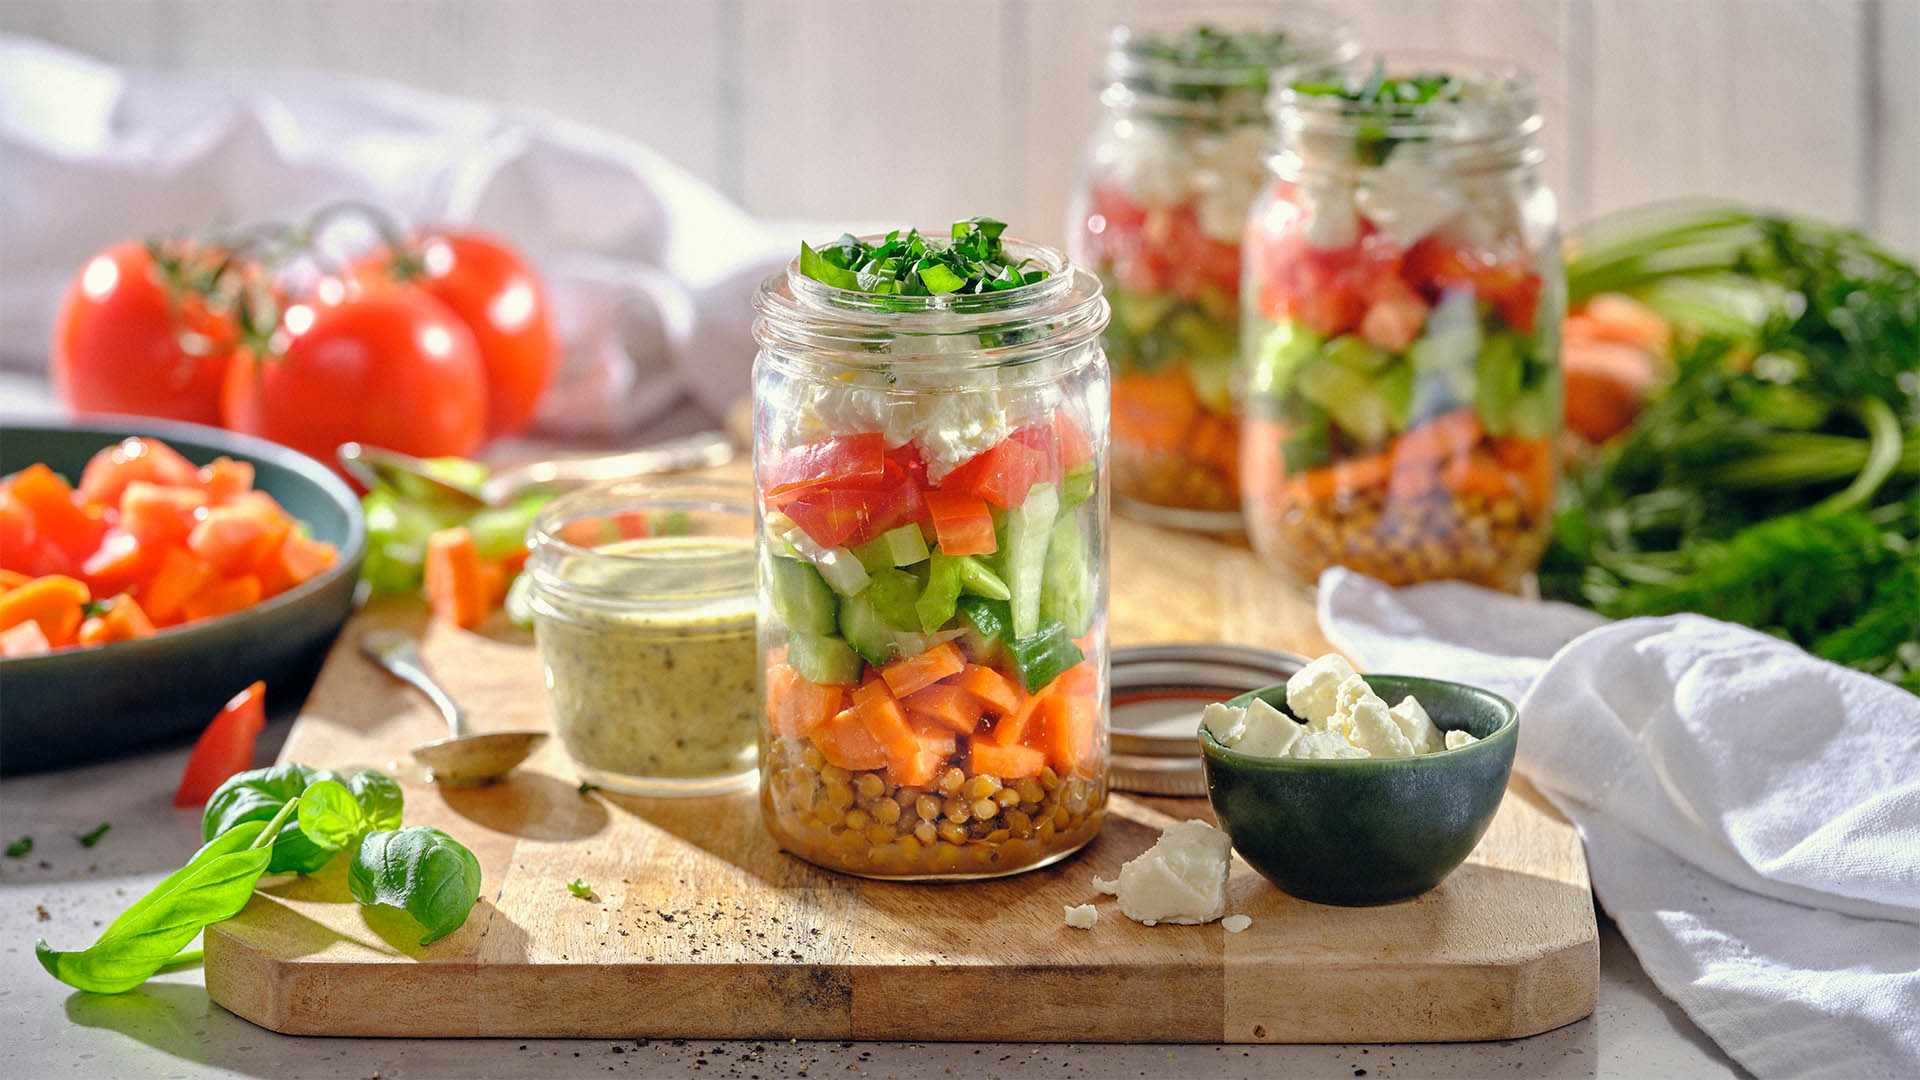 Side shot of jar filled with salad ingredients on a wooden board surrounded by salad ingredients and toppings.